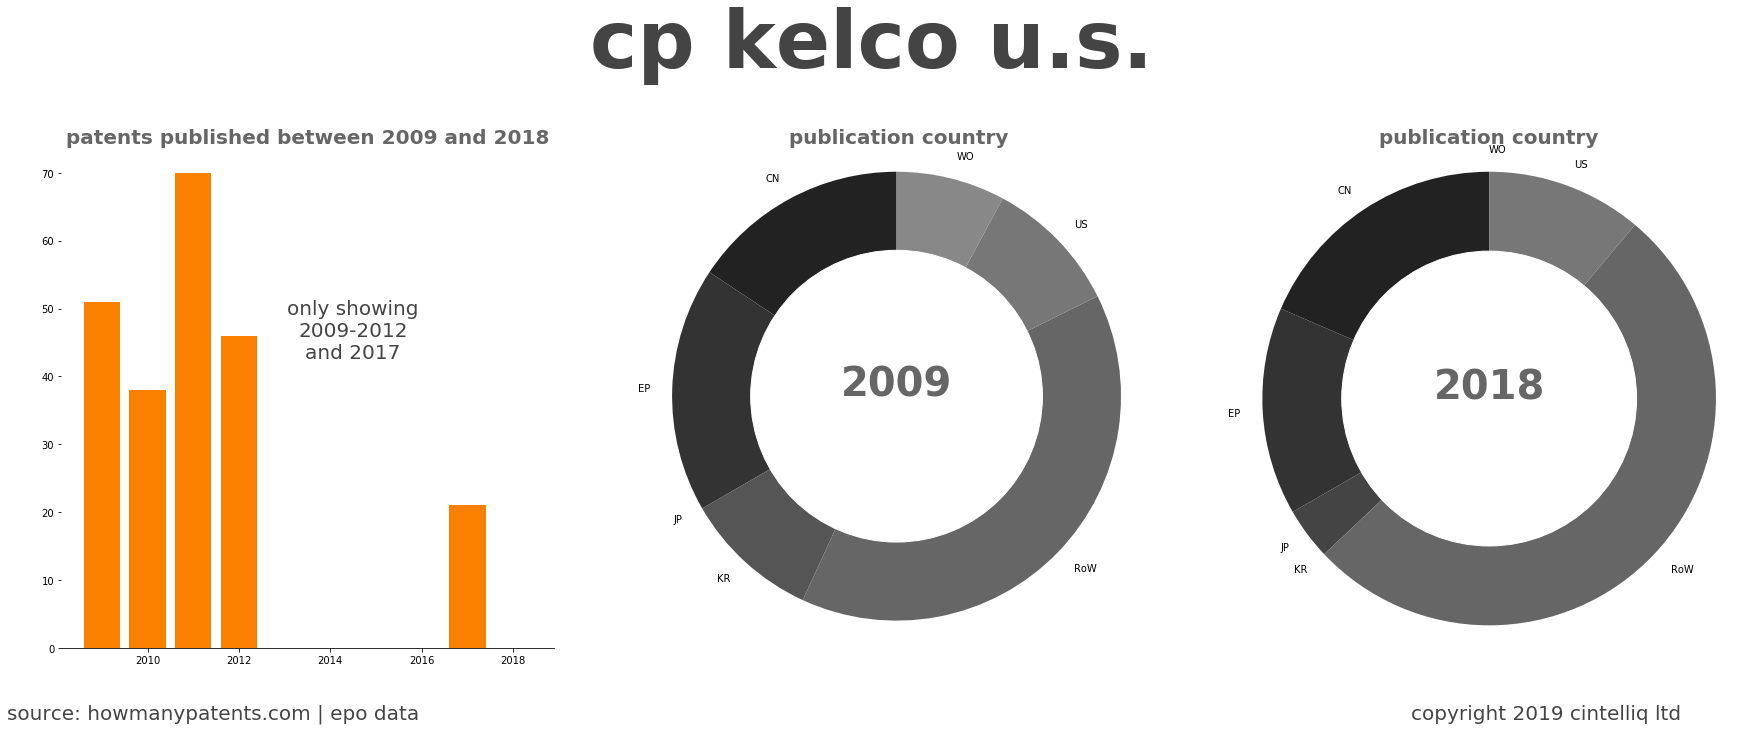 summary of patents for Cp Kelco U.S.